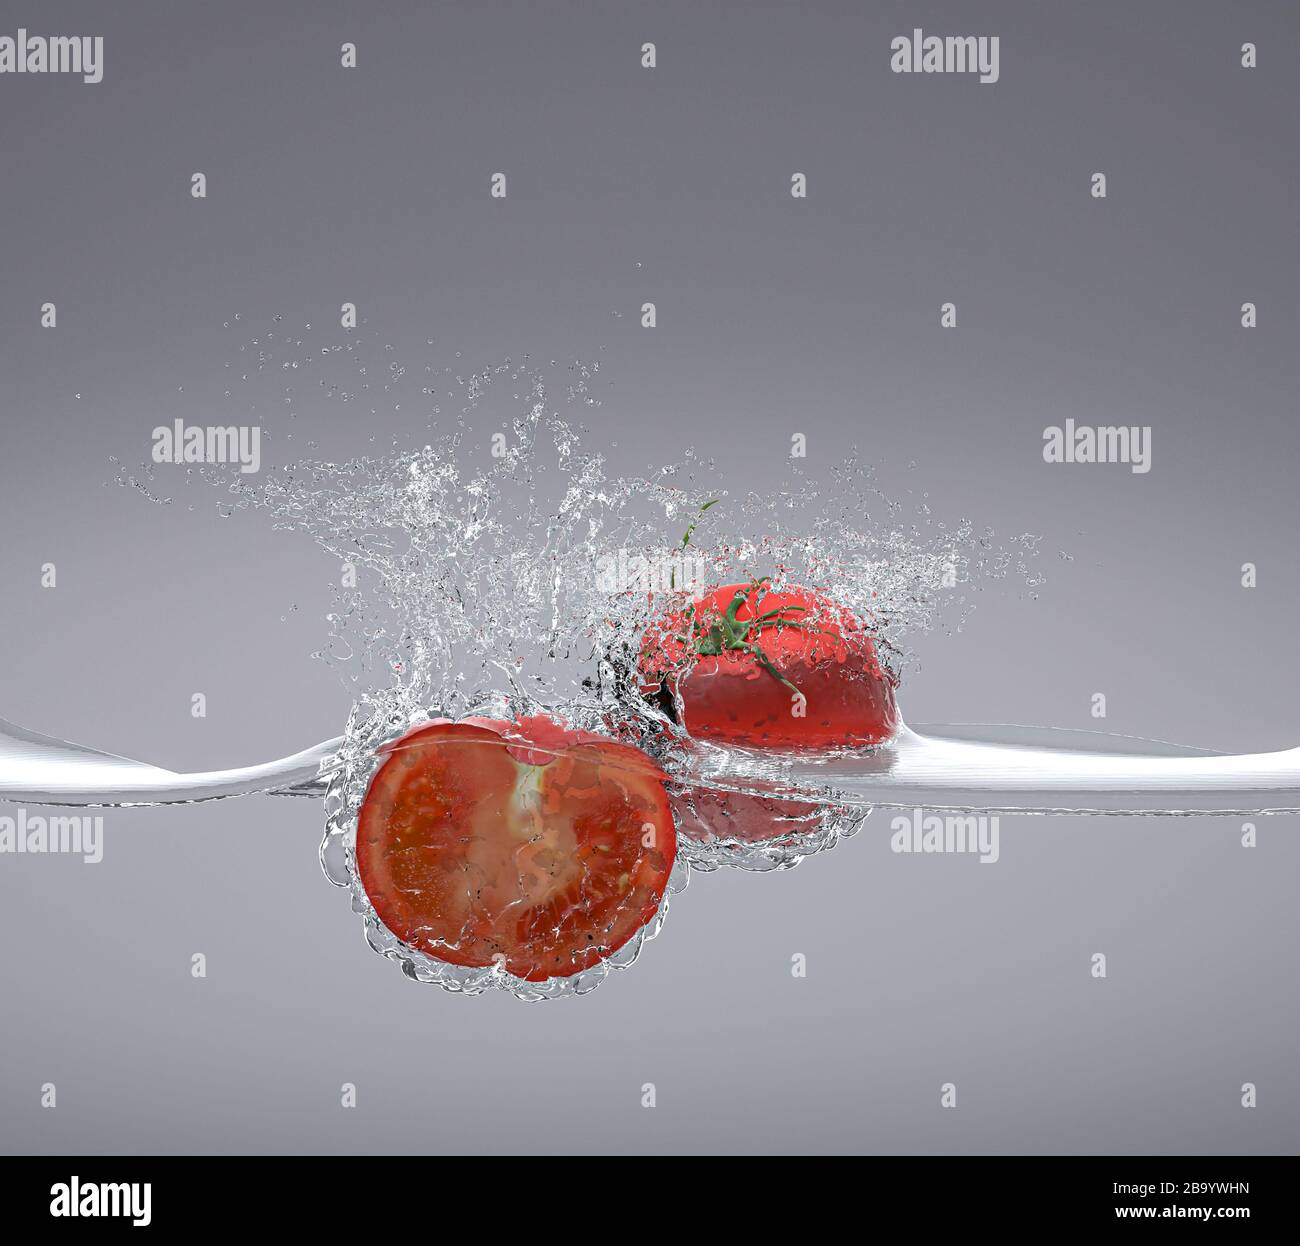 tomatoes fall into water by sprinkling around. concept of fresh and natural food. 3d render. nobody around Stock Photo